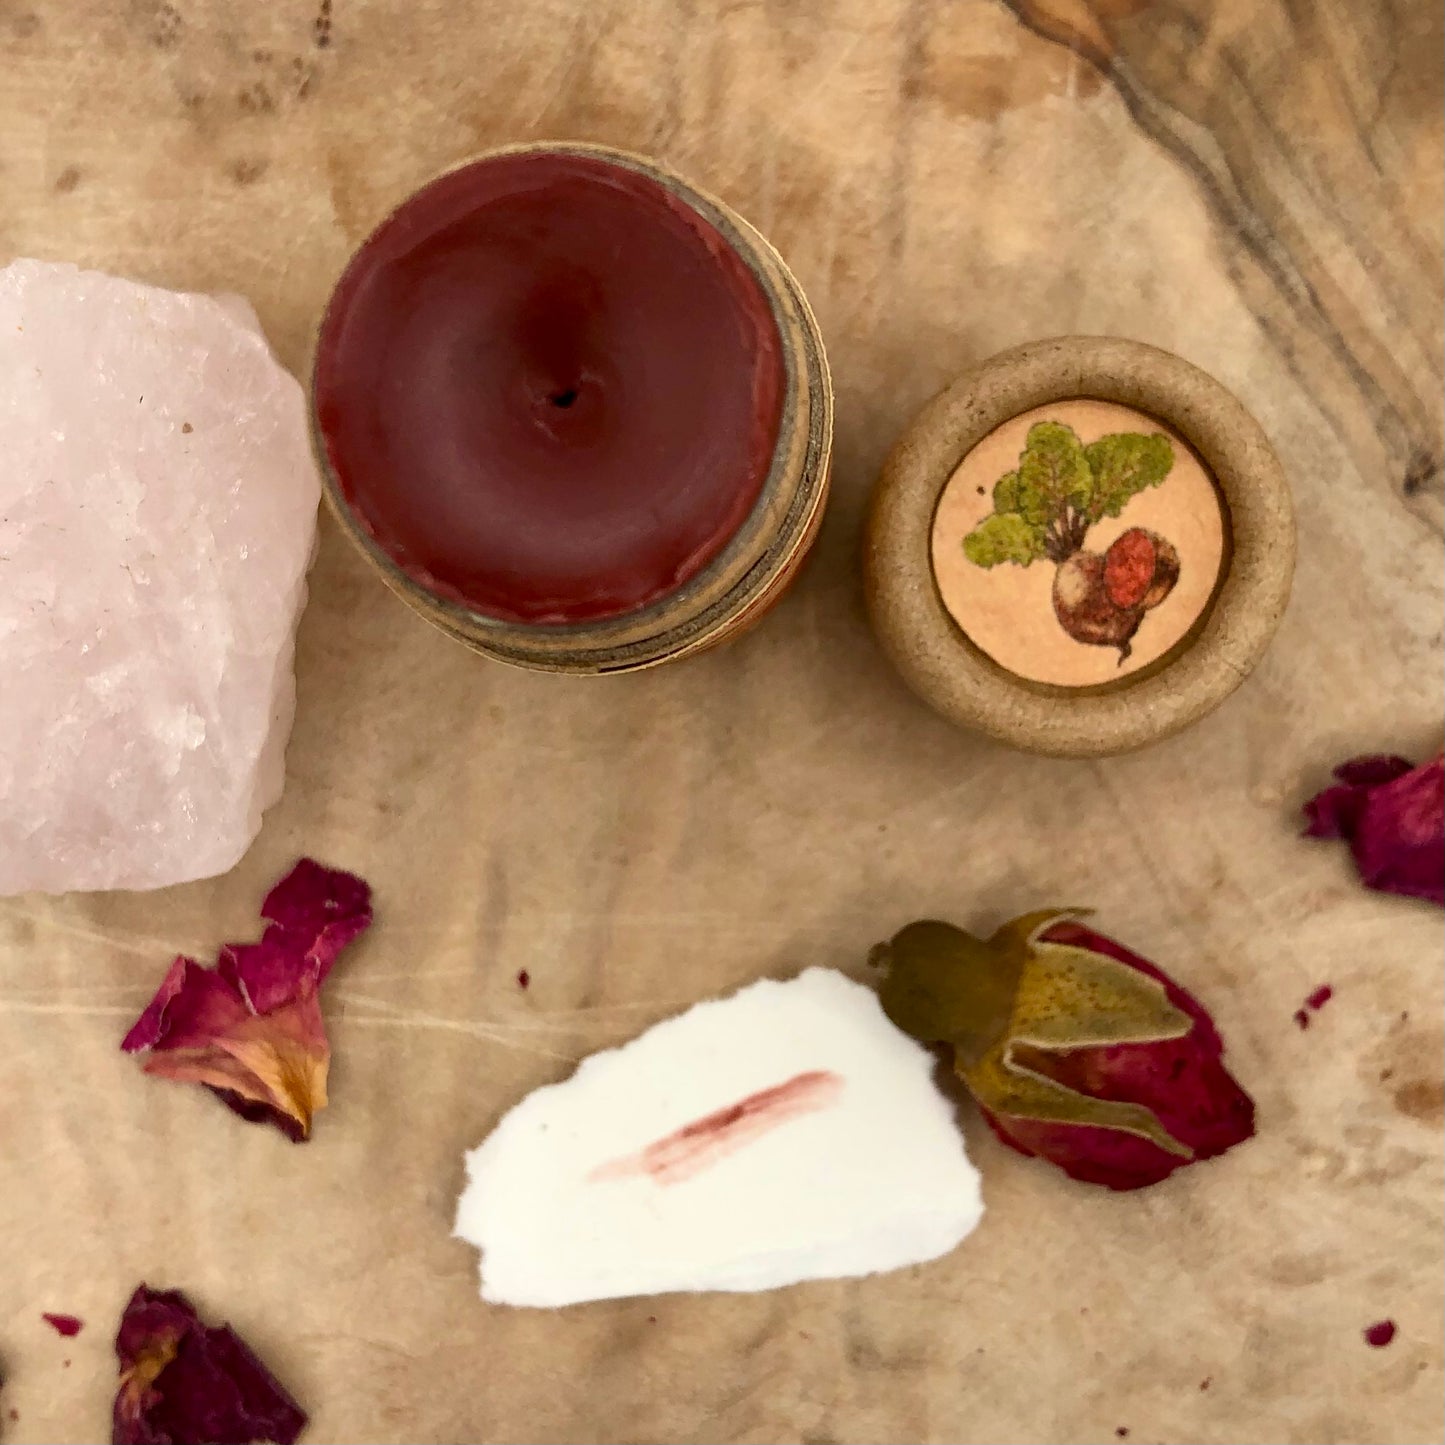 Enchanting Rose Petal & Beetroot Natural Pink Tinted Lip Balm | Moisturizing Cocoa Butter Lip Balm | Vegan Lip Tint | Nourishing Shea Butter Lip Balm | Magical Fairy Lover Gift | Organic | Handcrafted | Whimsical | Delicate Rose Aroma